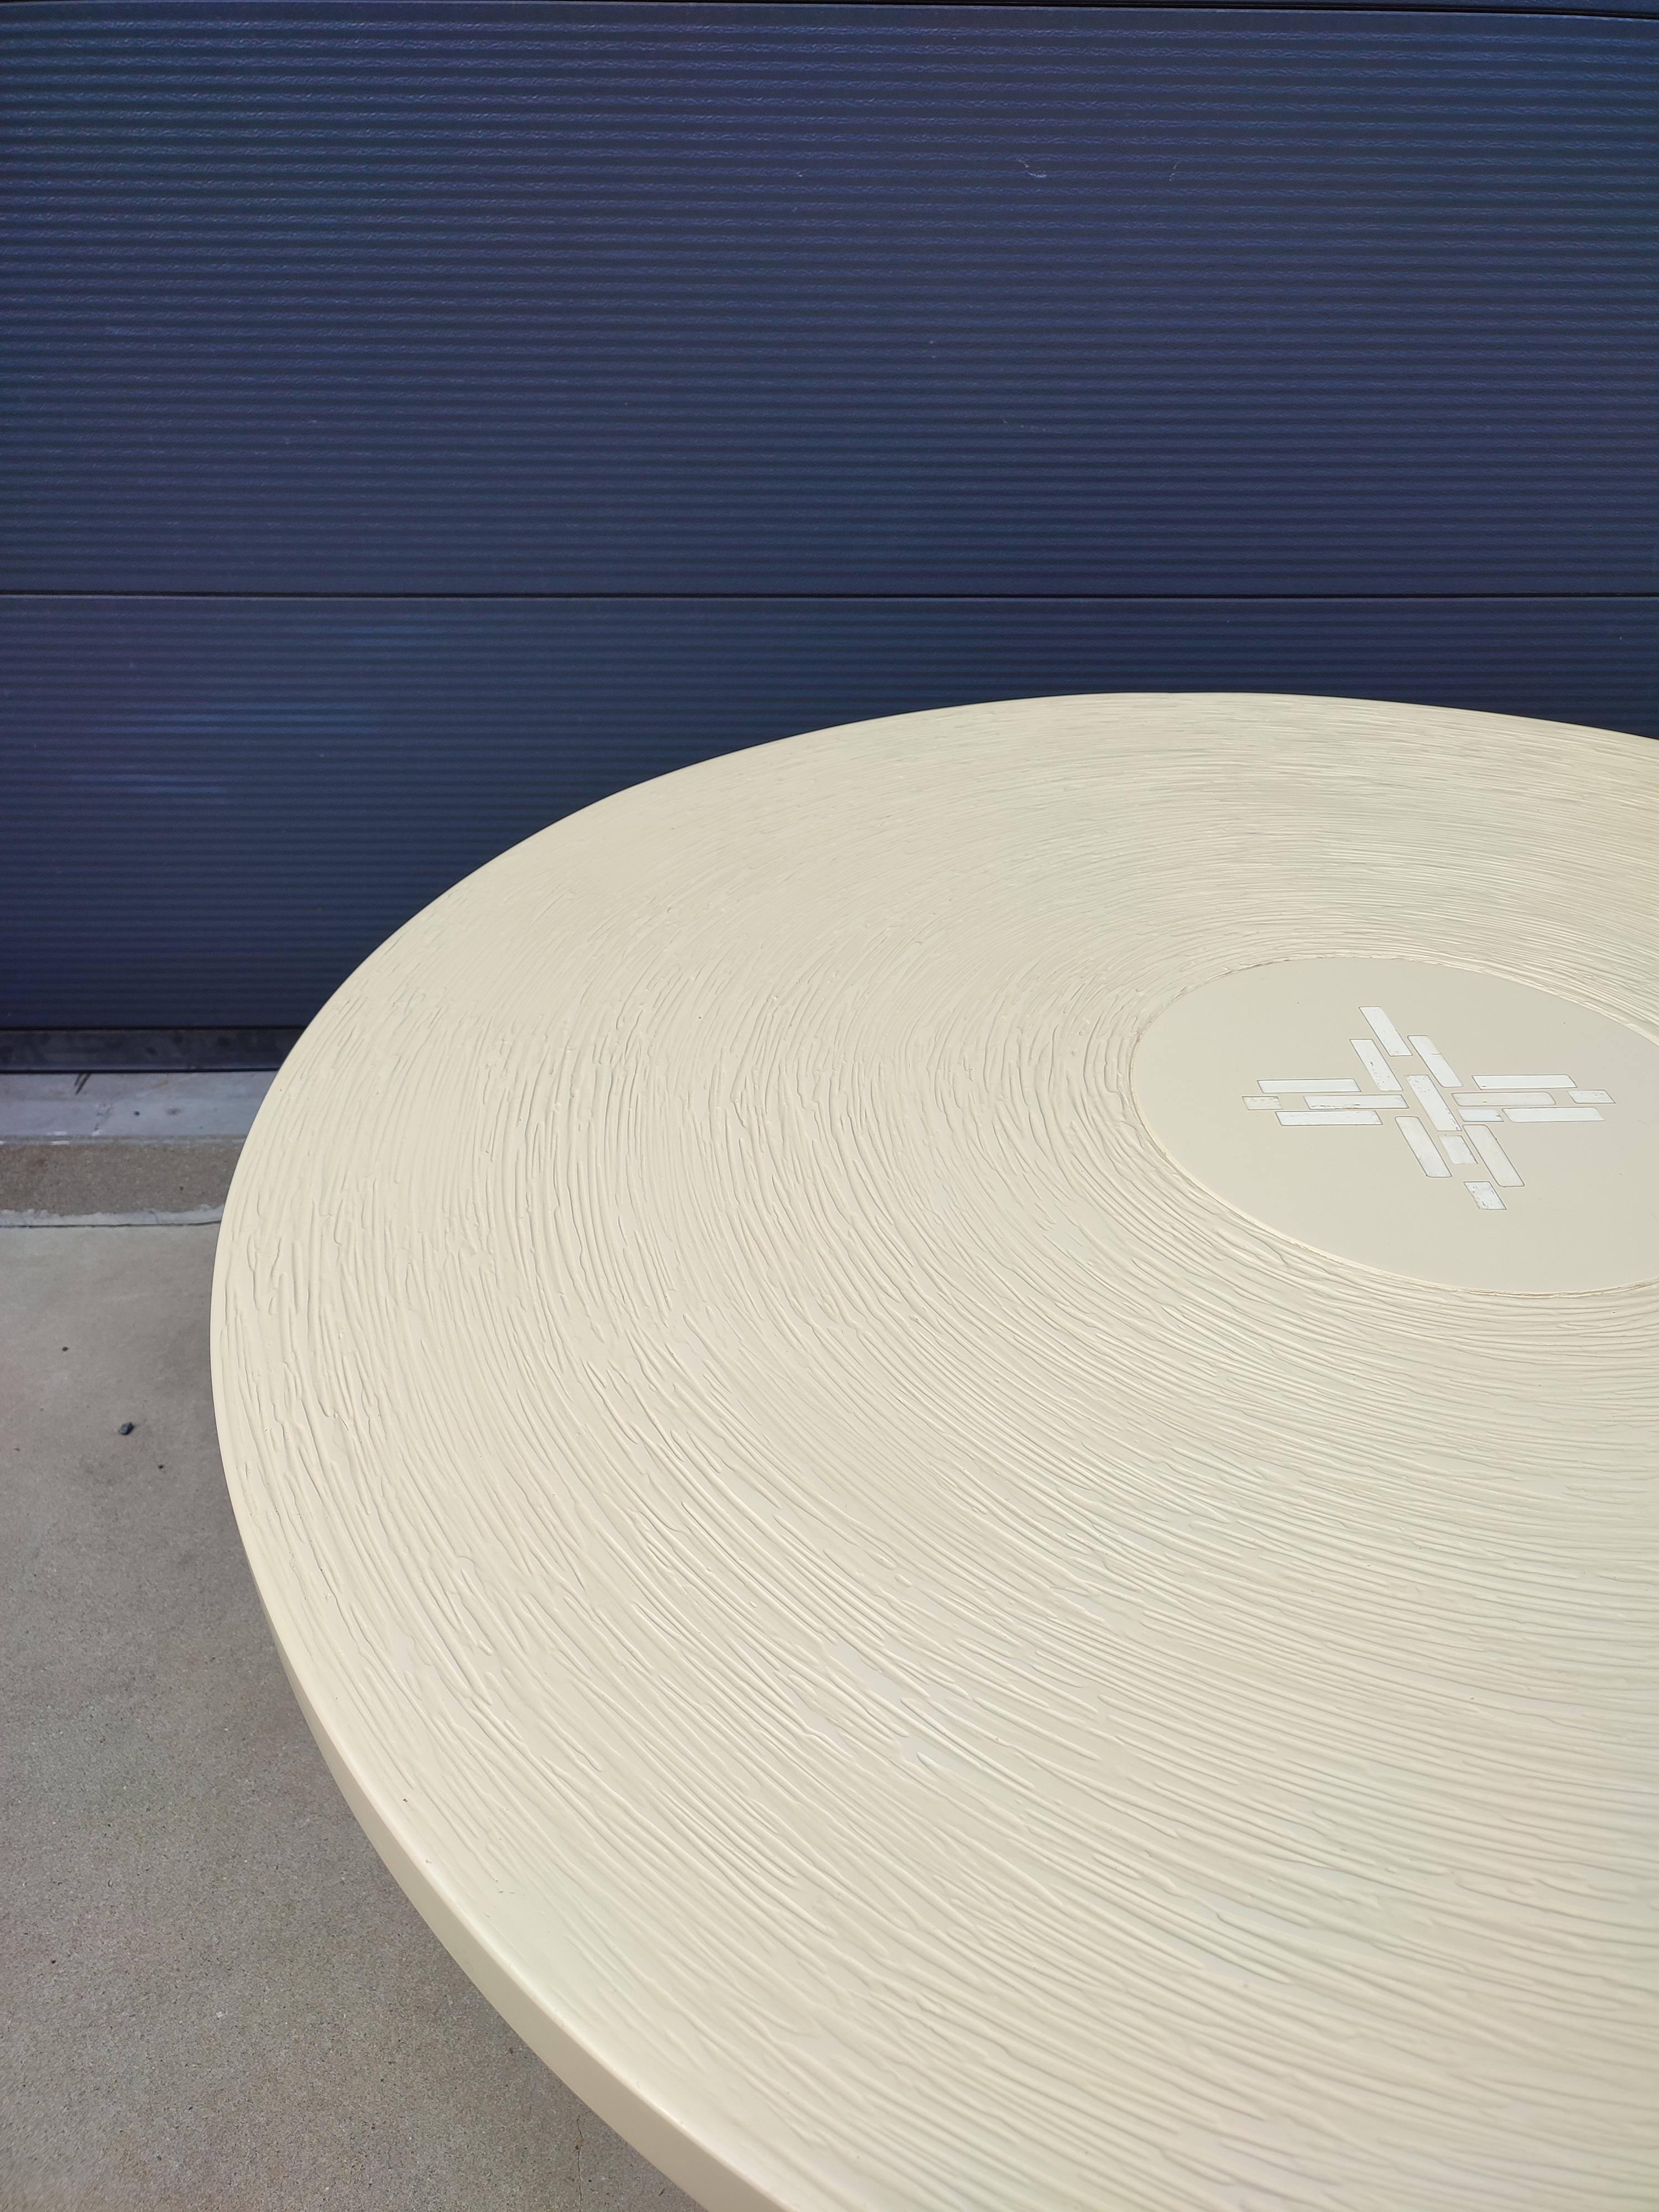 Very rare round dining table in resin from the Belgium artist and designer, Jean Claude Dresse. This table was made in the mid 1970s. The top of the table is carved with organic shapes. The feed are lacquered in cream/ white with slightly traces of